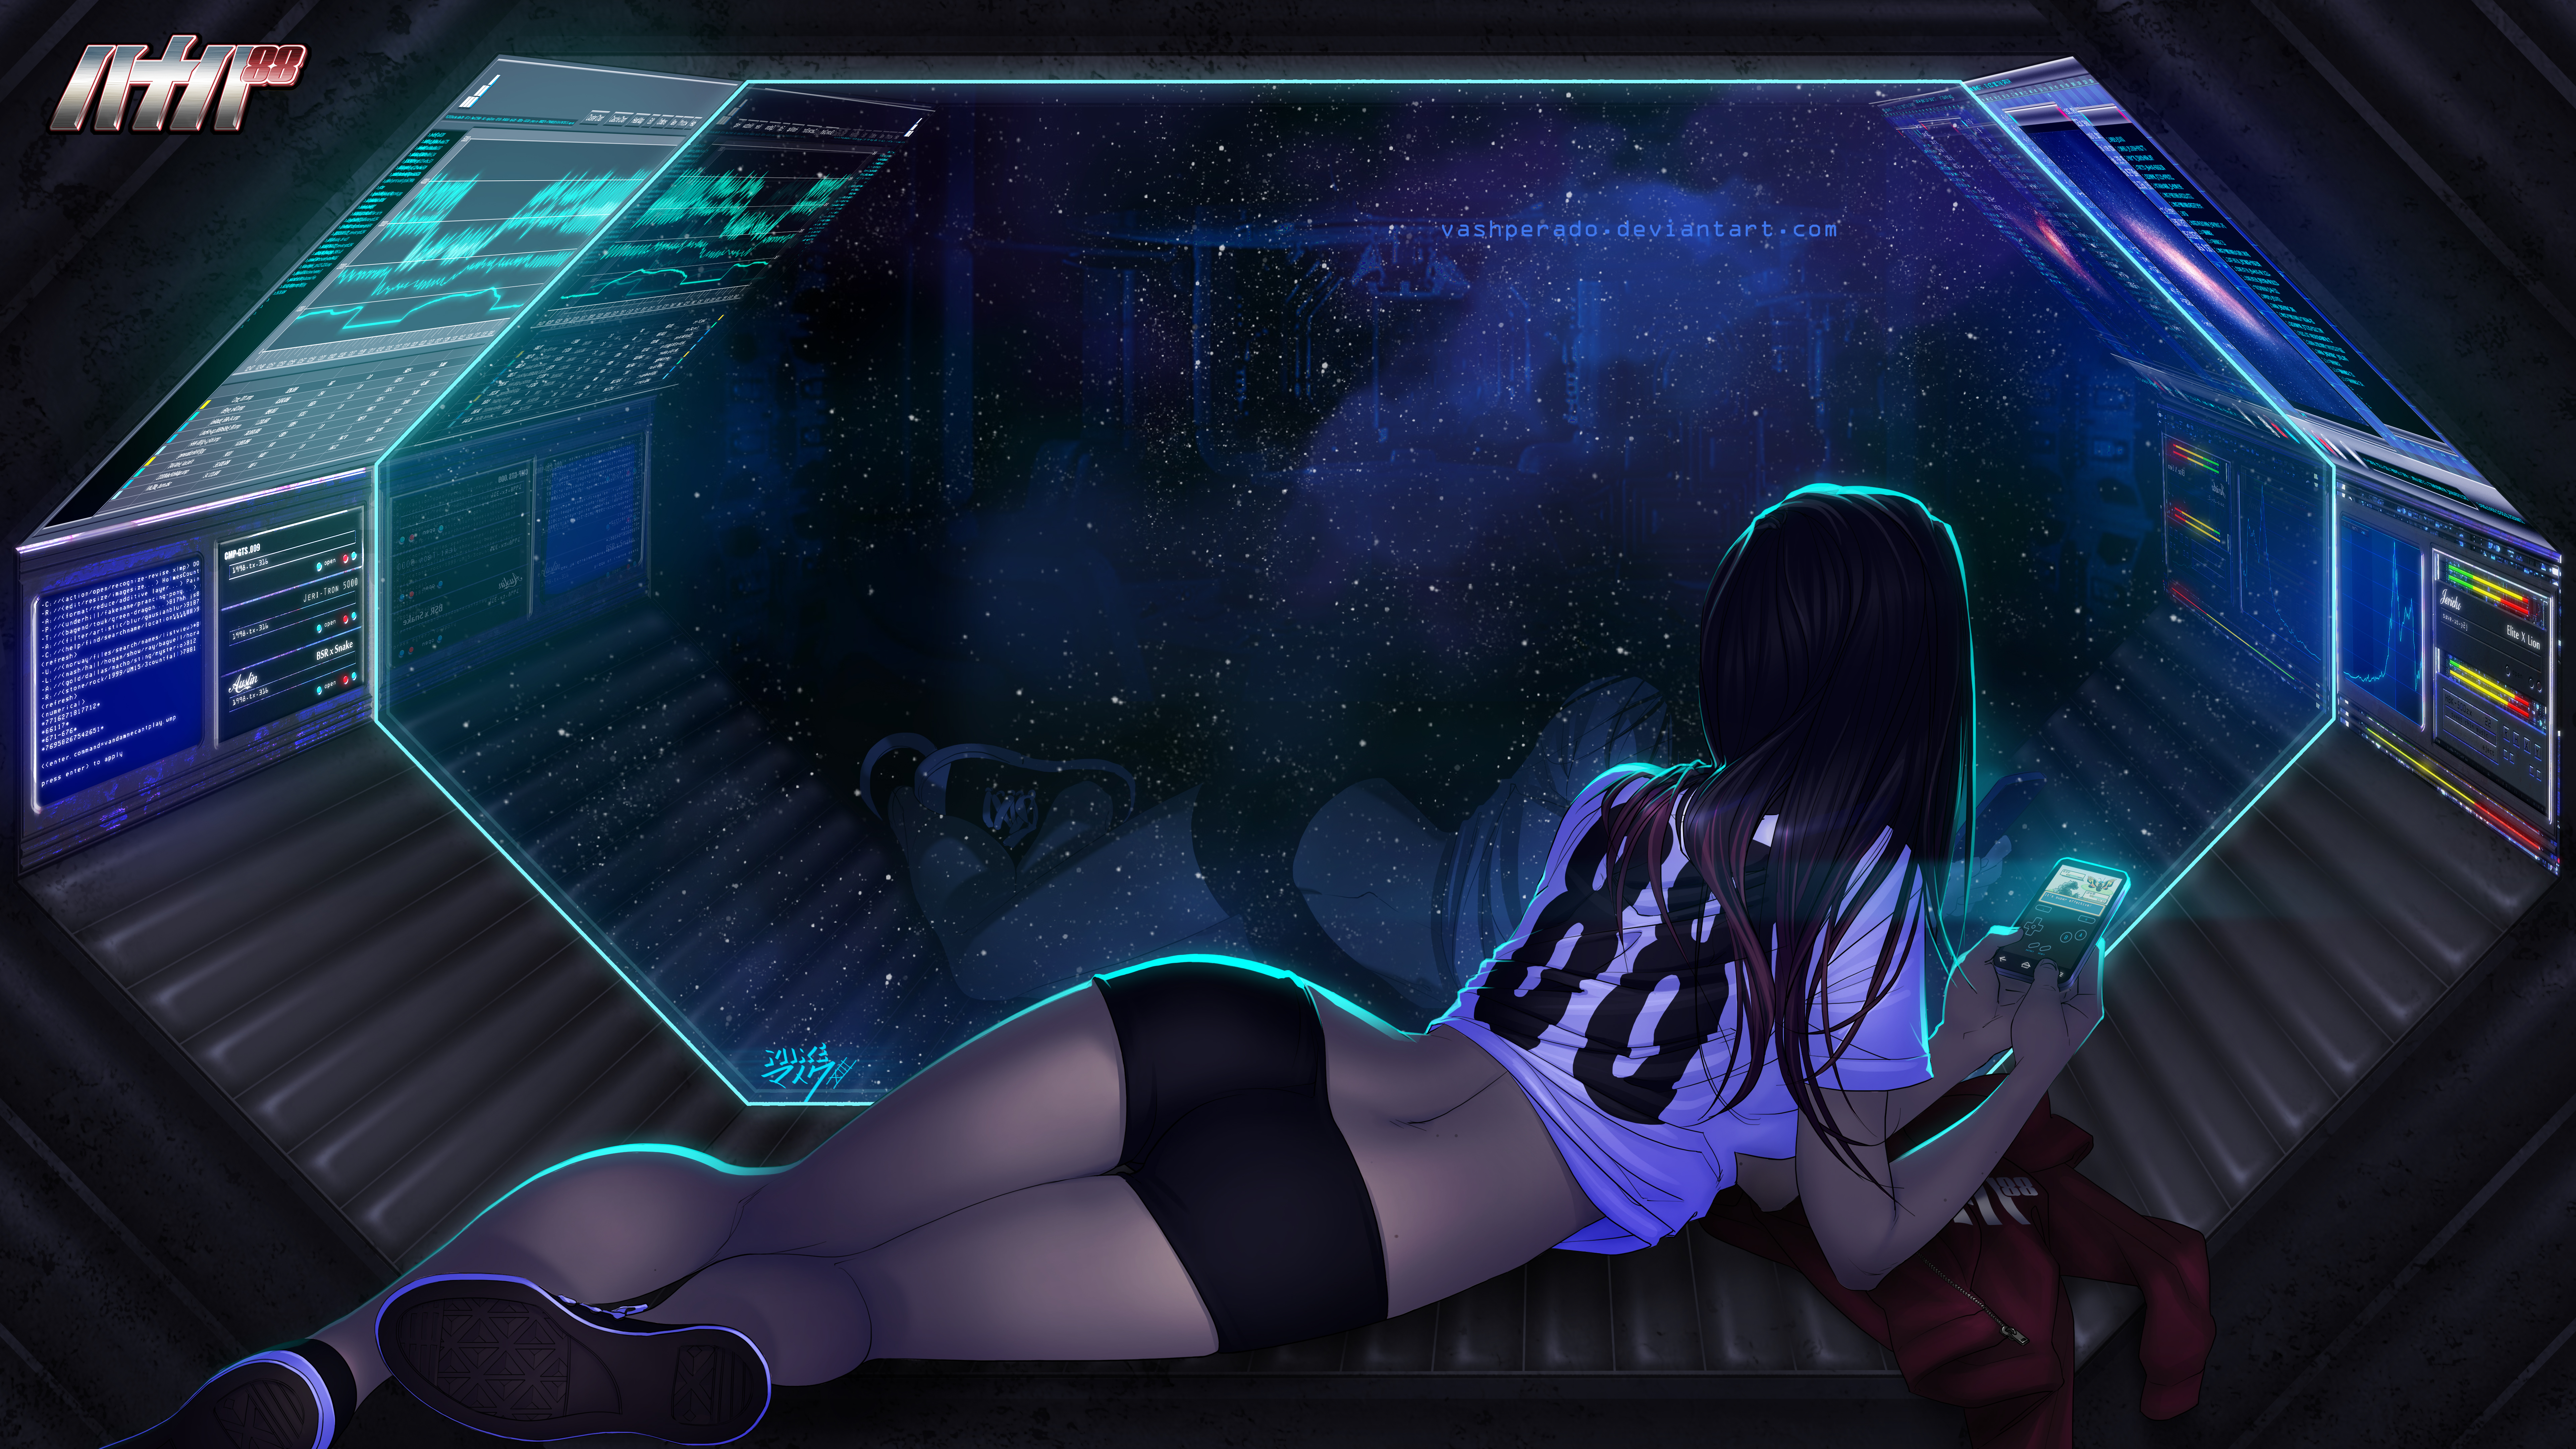 General 7680x4320 88 chan long hair spaceship space galaxy technology shorts stars loneliness dark drawing space out digital art